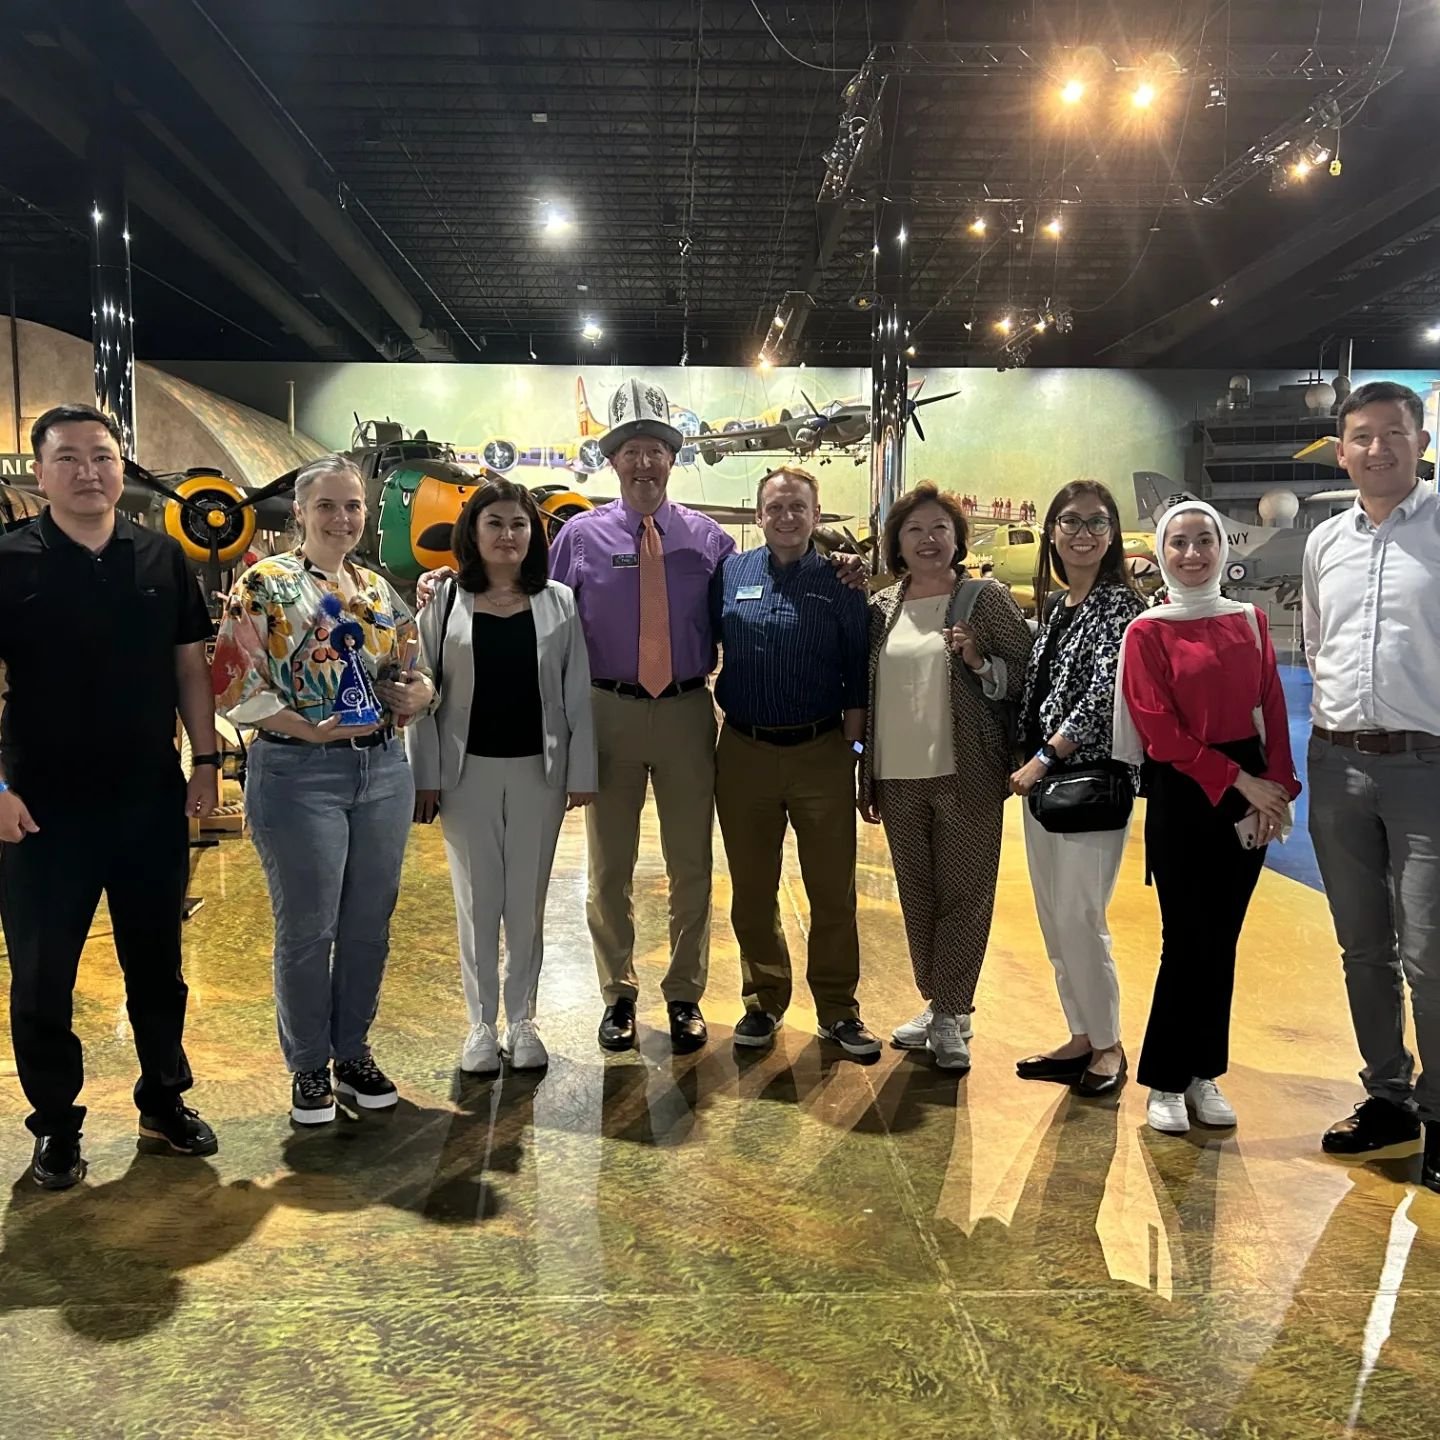 It's been a joy connecting IVLP participants from this Education In The Digital Age program from the Kyrgyz Republic with their peers in West Michigan.

Their meeting at the Air Zoo was especially unforgettable, as CEO Troy Thrash (pictured here wear